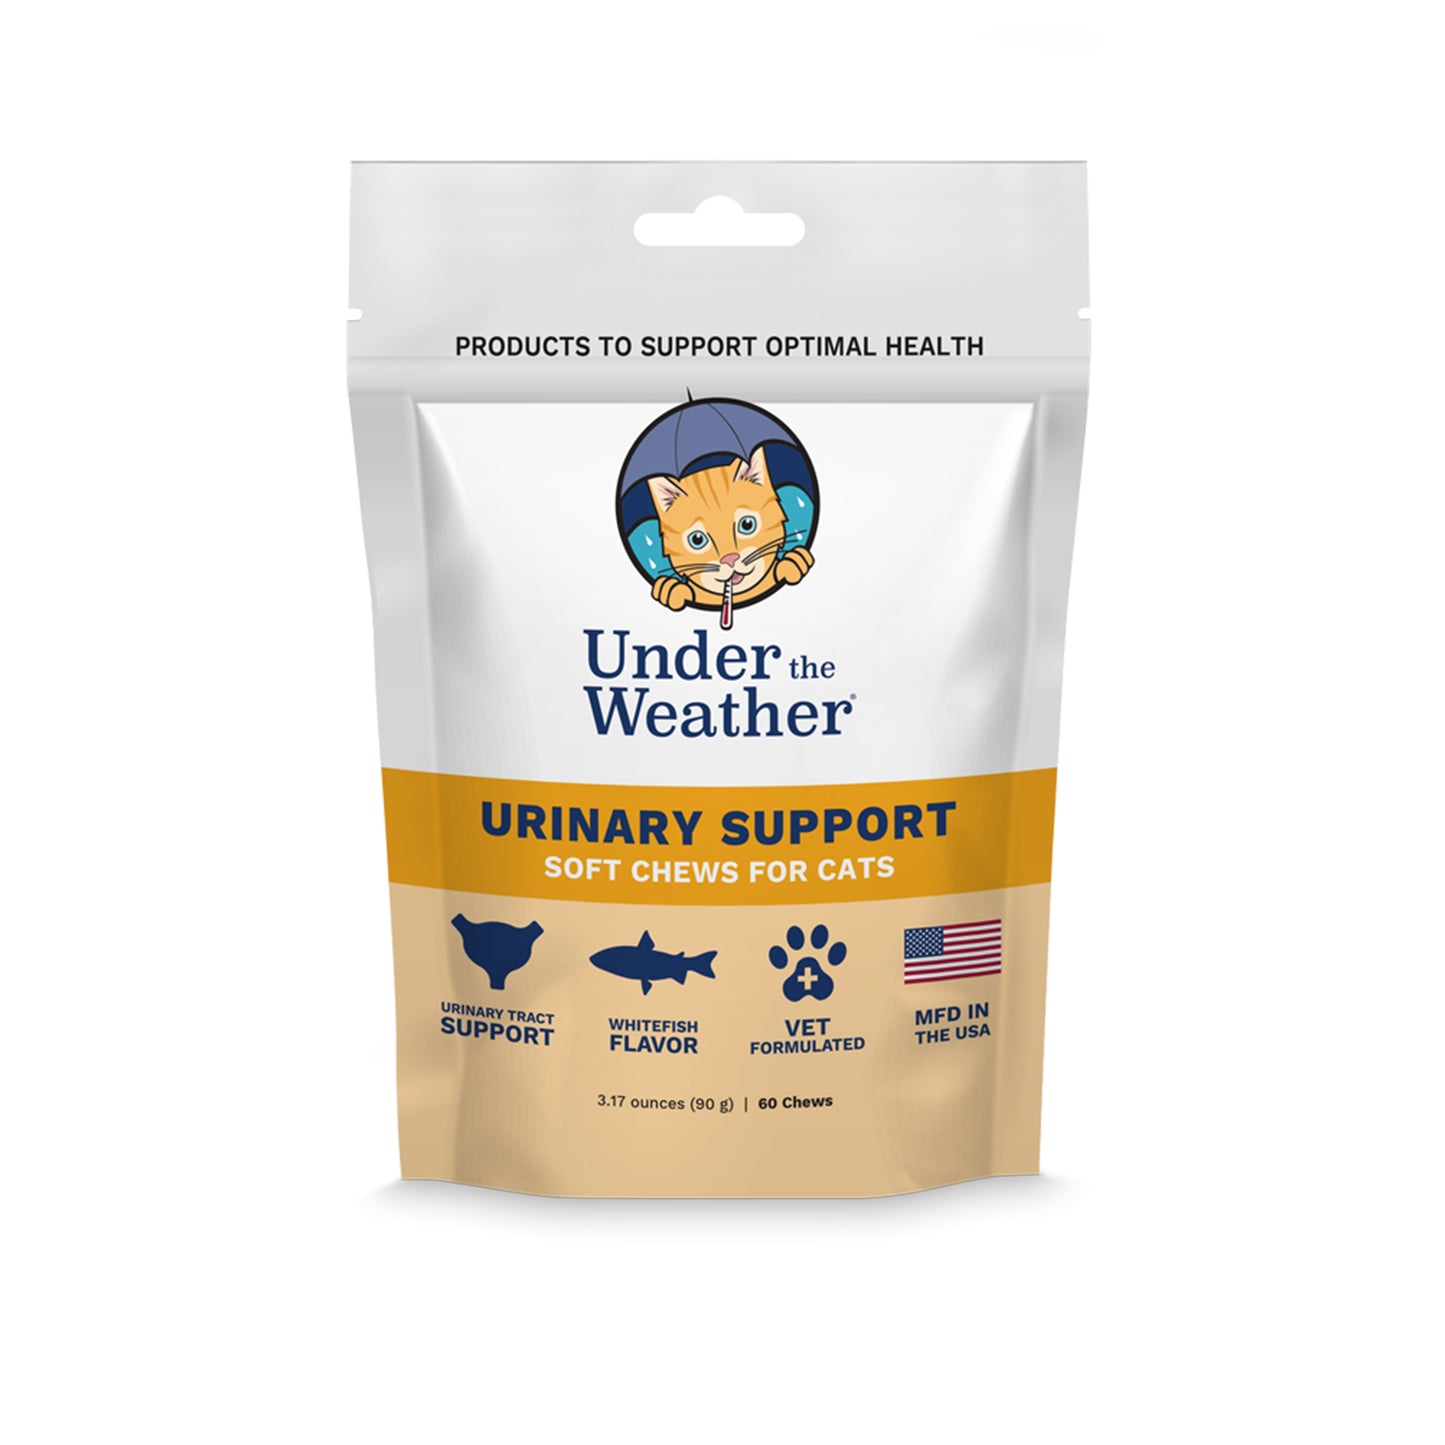 Urinary Support Soft Chews For Cats